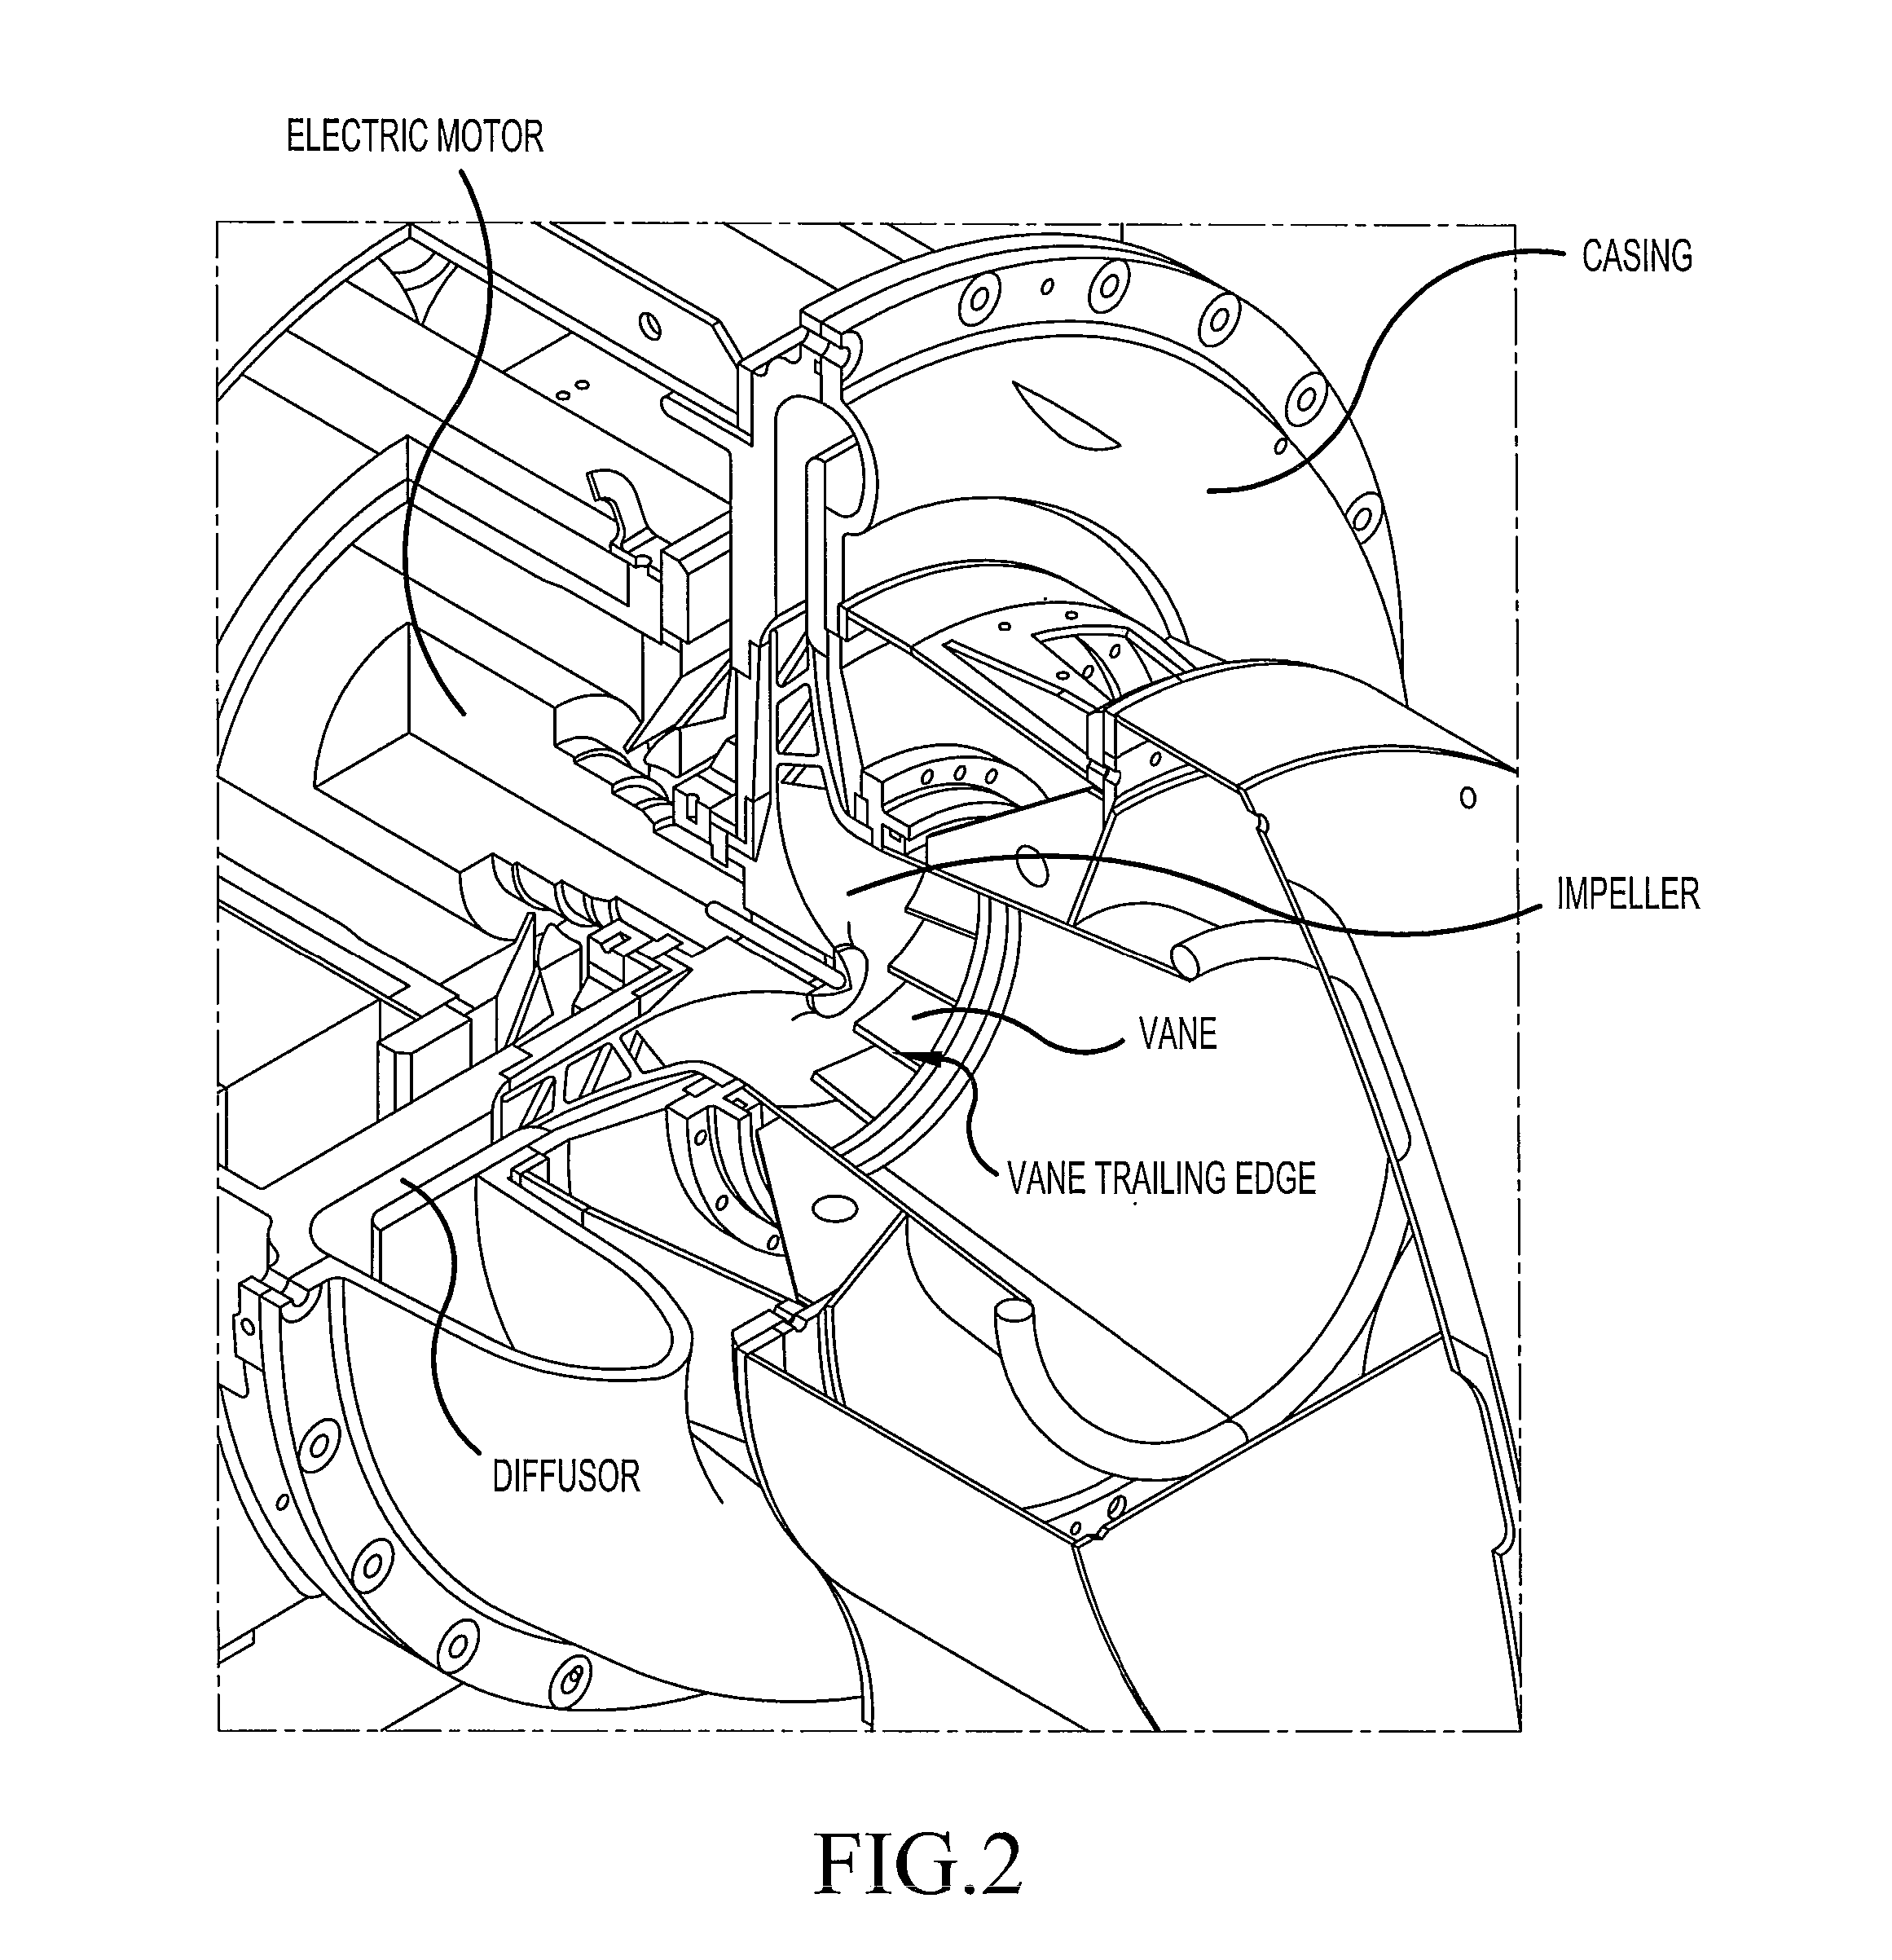 Method for manufacturing the impeller of a centrifugal compressor